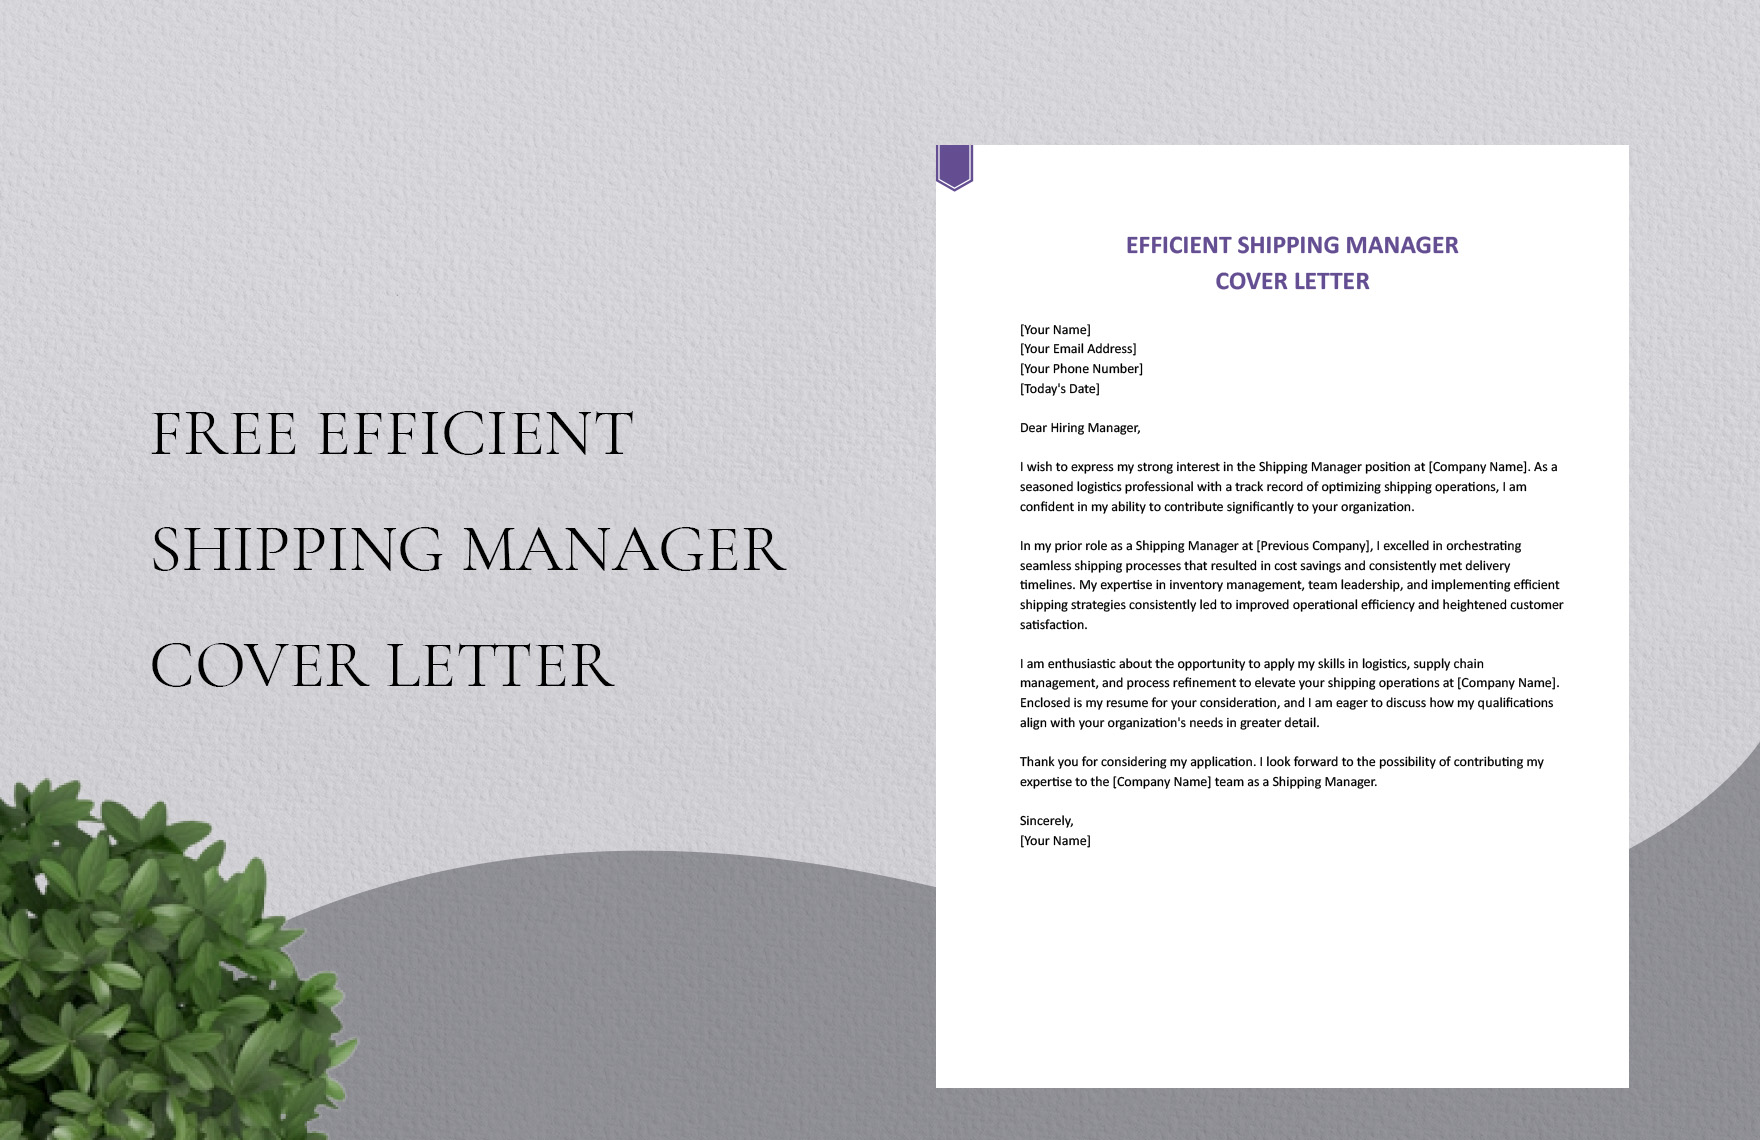 Efficient Shipping Manager Cover Letter